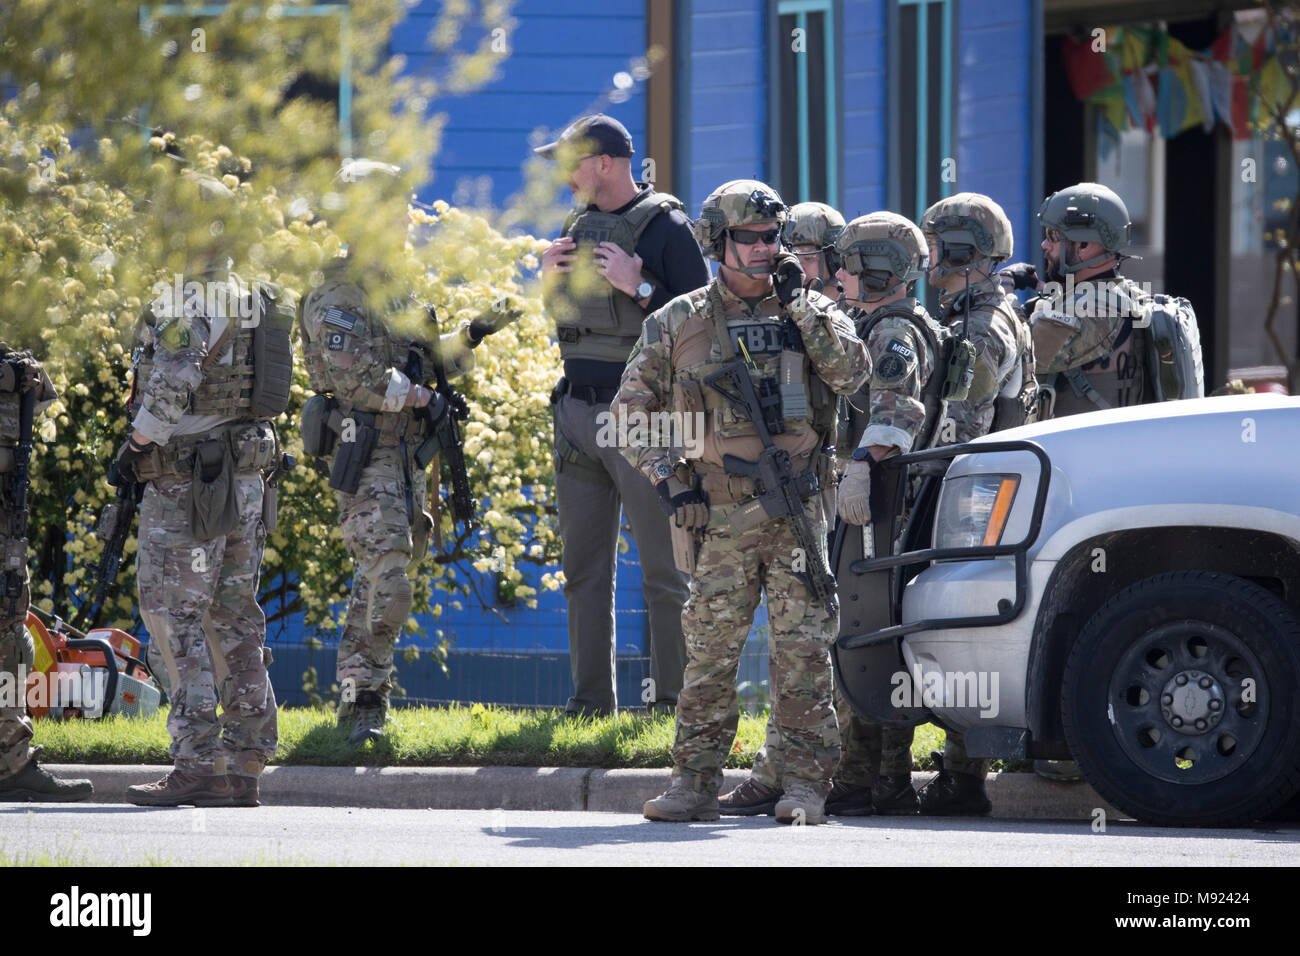 Police SWAT teams secure the Pflugerville, TX, neighborhood around the home of Mark Conditt, who was the suspected serial bomber terrorizing Austin for three weeks. Conditt killed himself earlier in the day during a car chase as officers closed in. Stock Photo